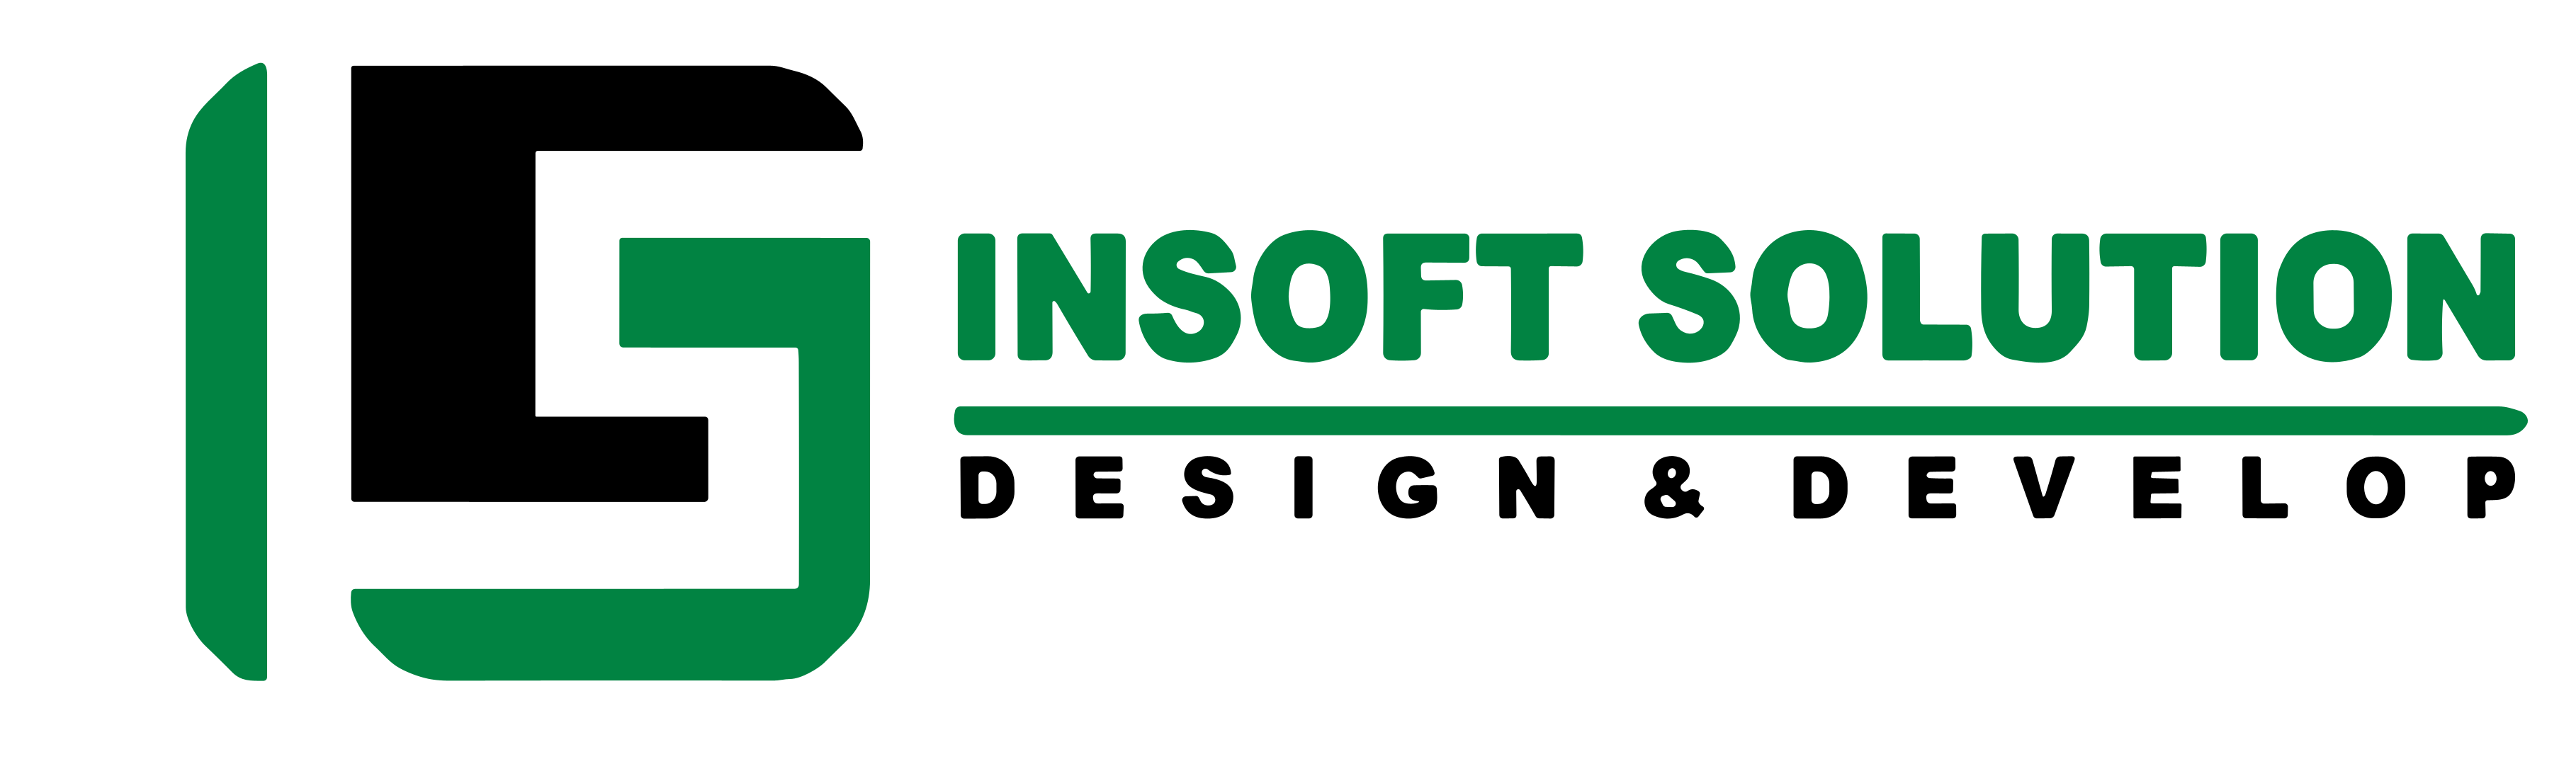 see-the-boundless-opportunities-your-business-may-experience-with-insoft-solution-your-best-web-development-variant